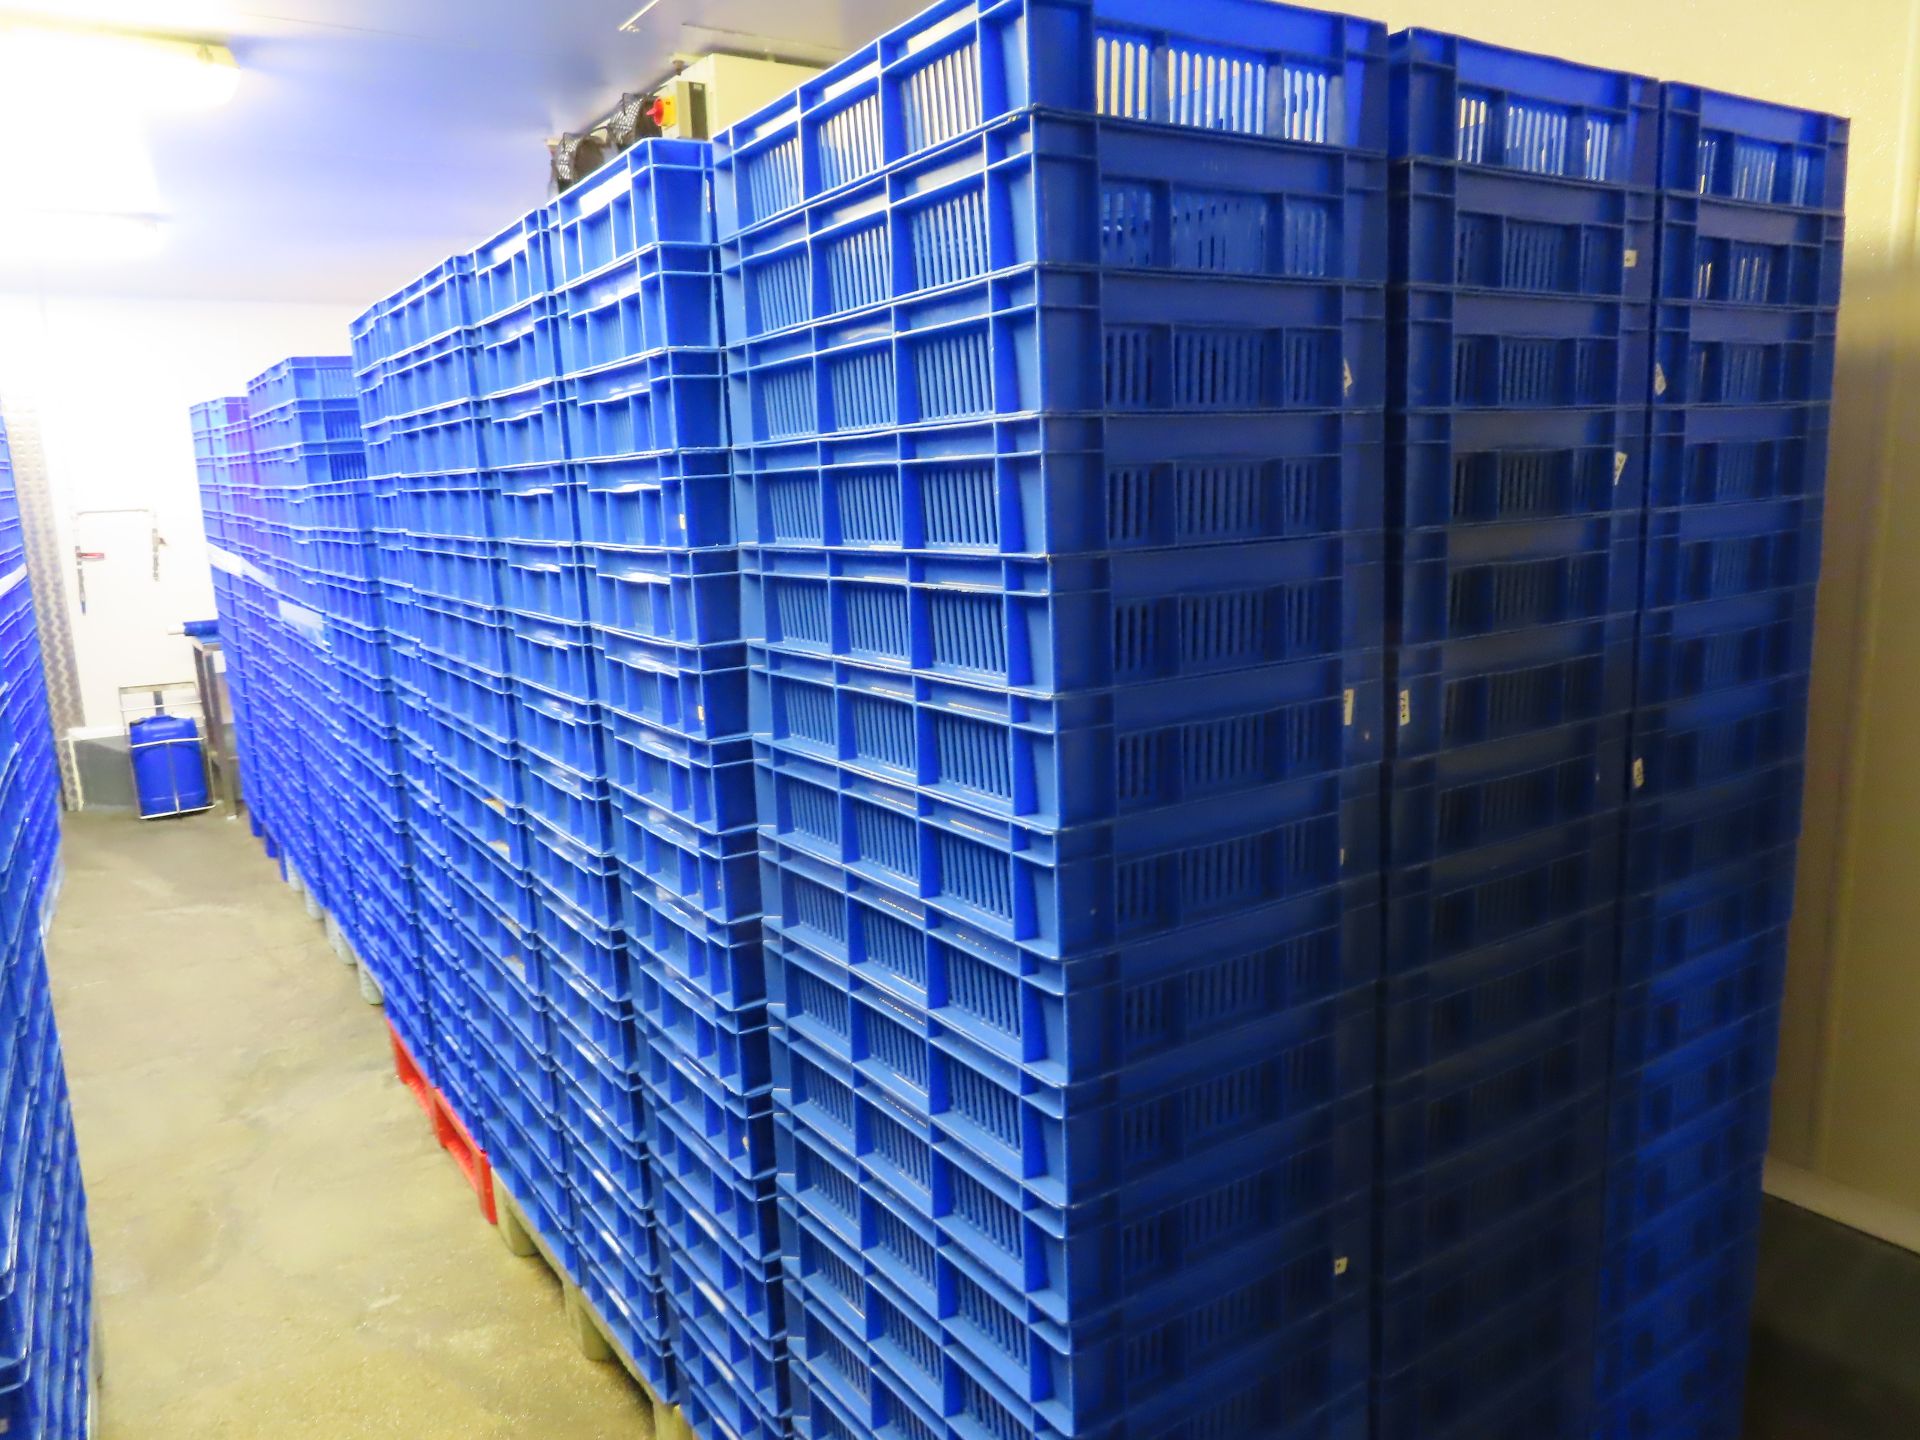 6 X PALLETS OF TRAYS (APPROX. 80 BLUE TRAYS ON EACH PALLET).